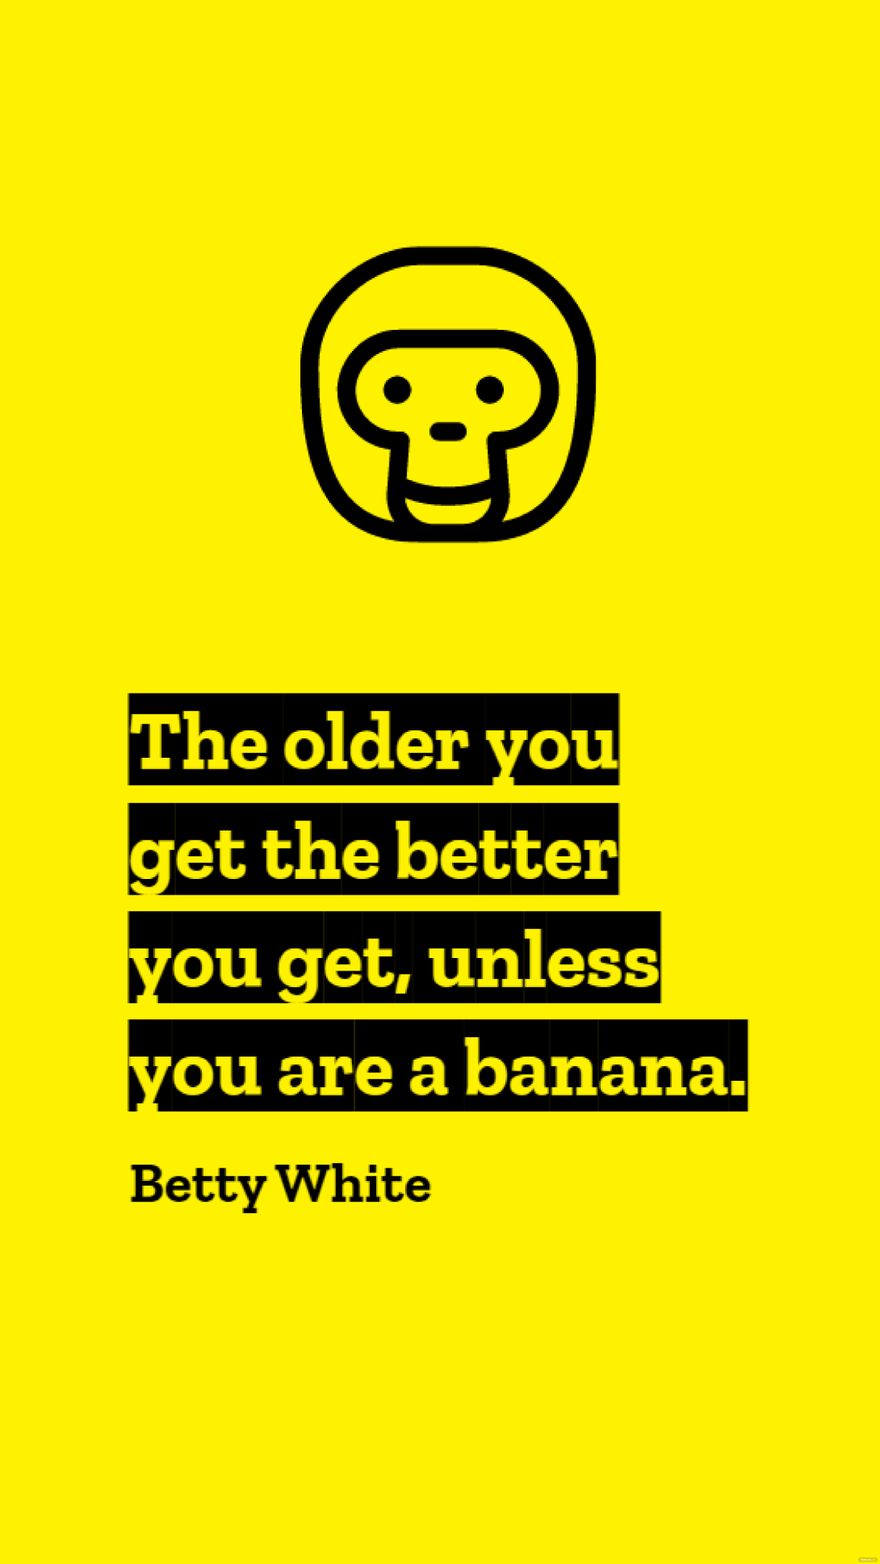 Free Betty White - The older you get the better you get, unless you are a banana.